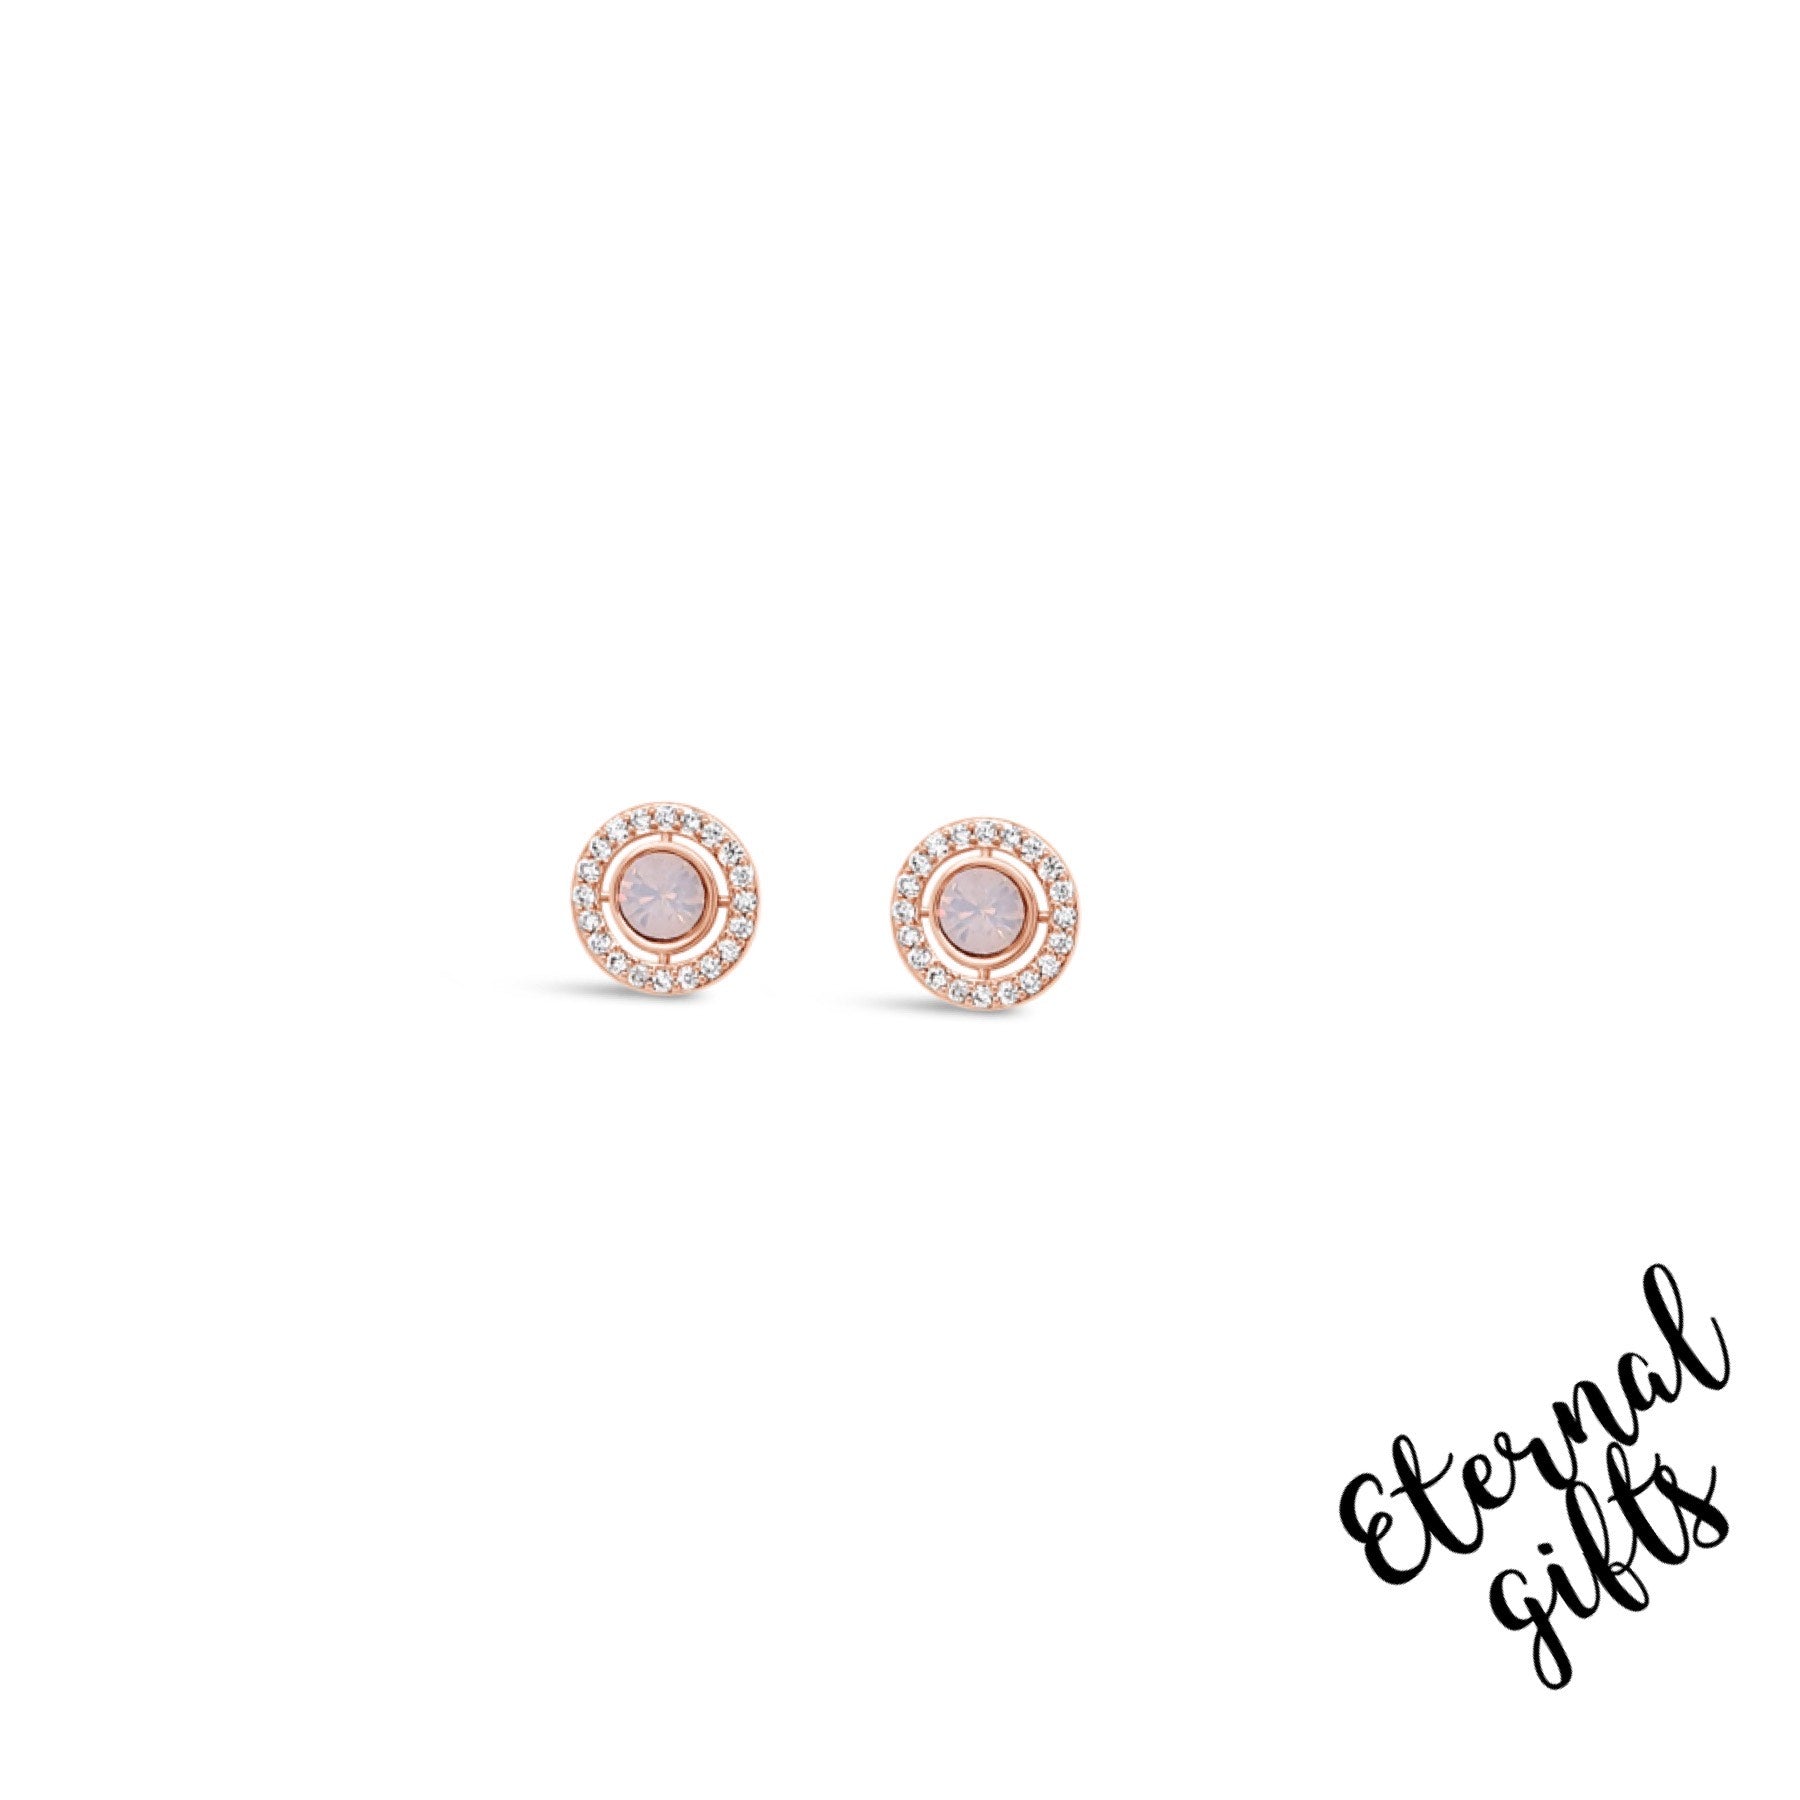 Halo Stud Earring in Blush Pink & Gold By Absolute Earrings